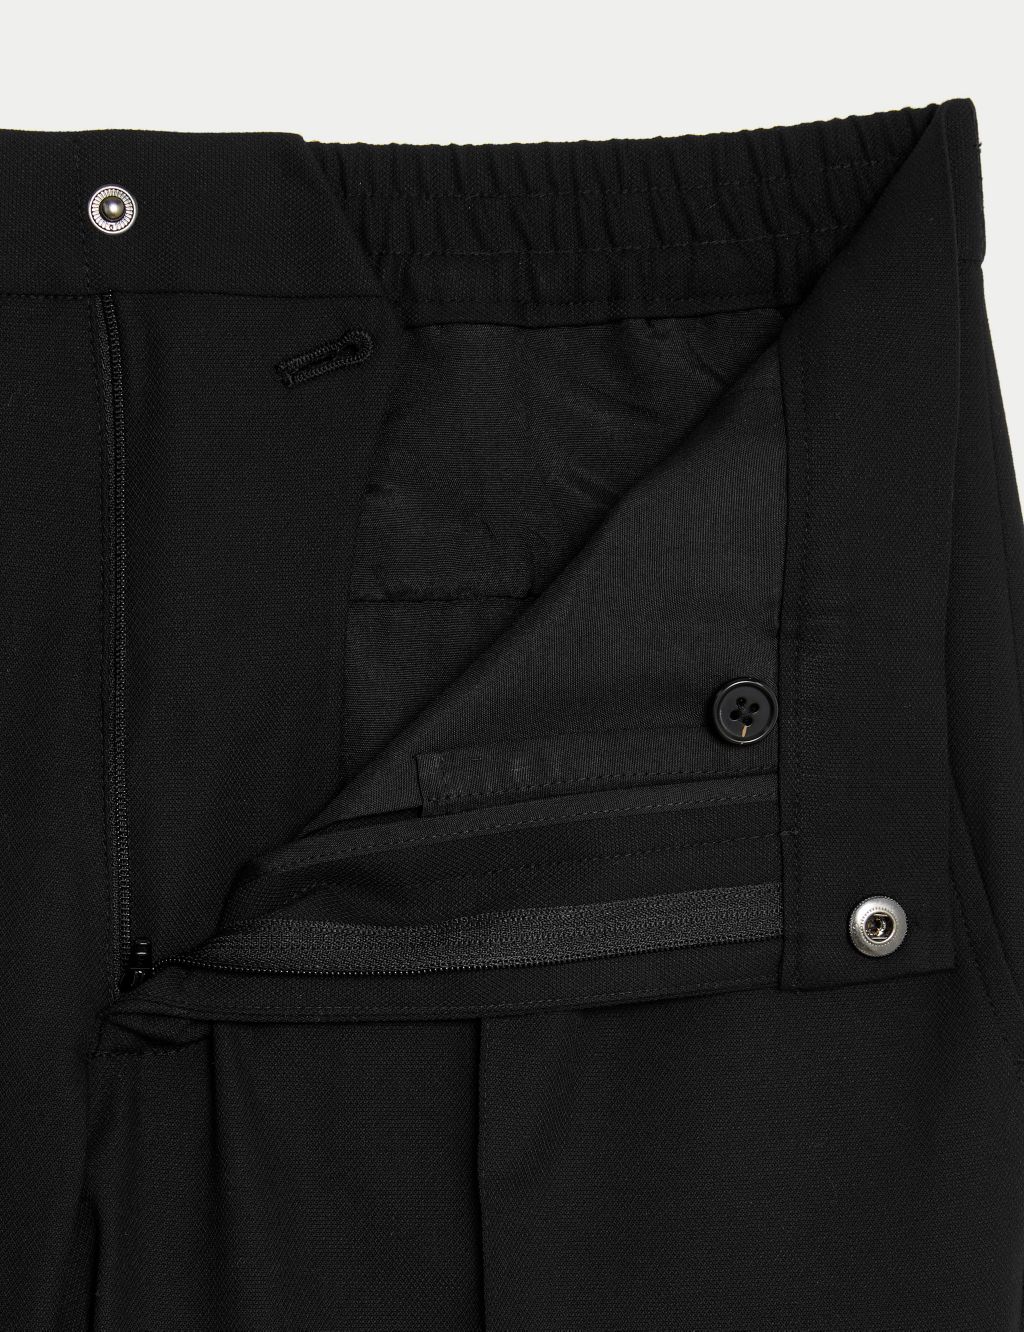 Tailored Fit Flat Front Textured Trousers image 6